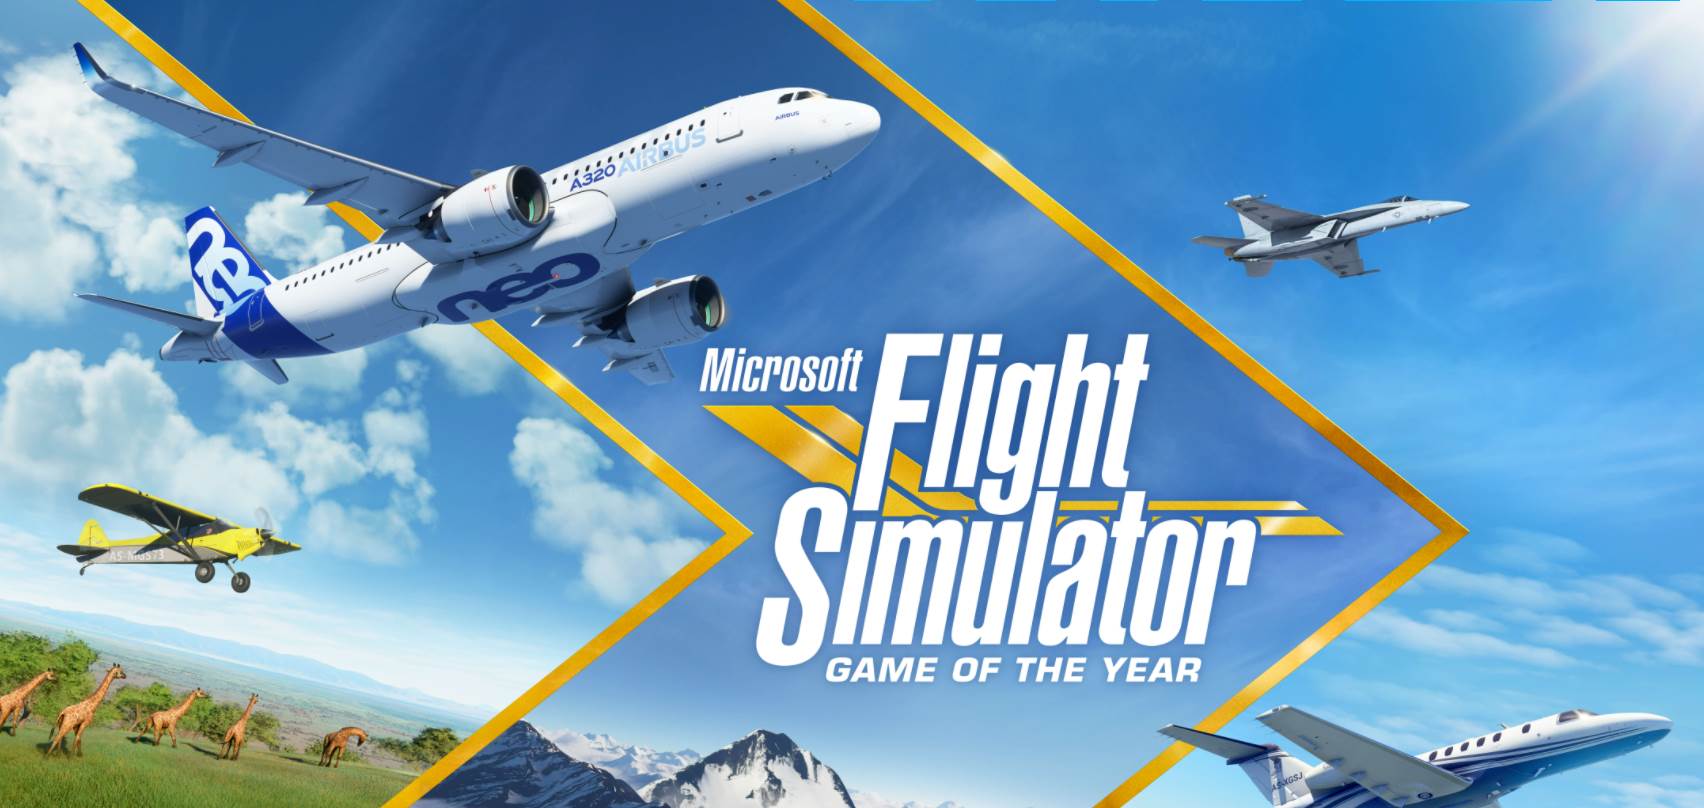 Microsoft Flight Simulator 2020 Update 7 Patch Notes (1.21.13.0): F/A-18 Super Hornet Added and More